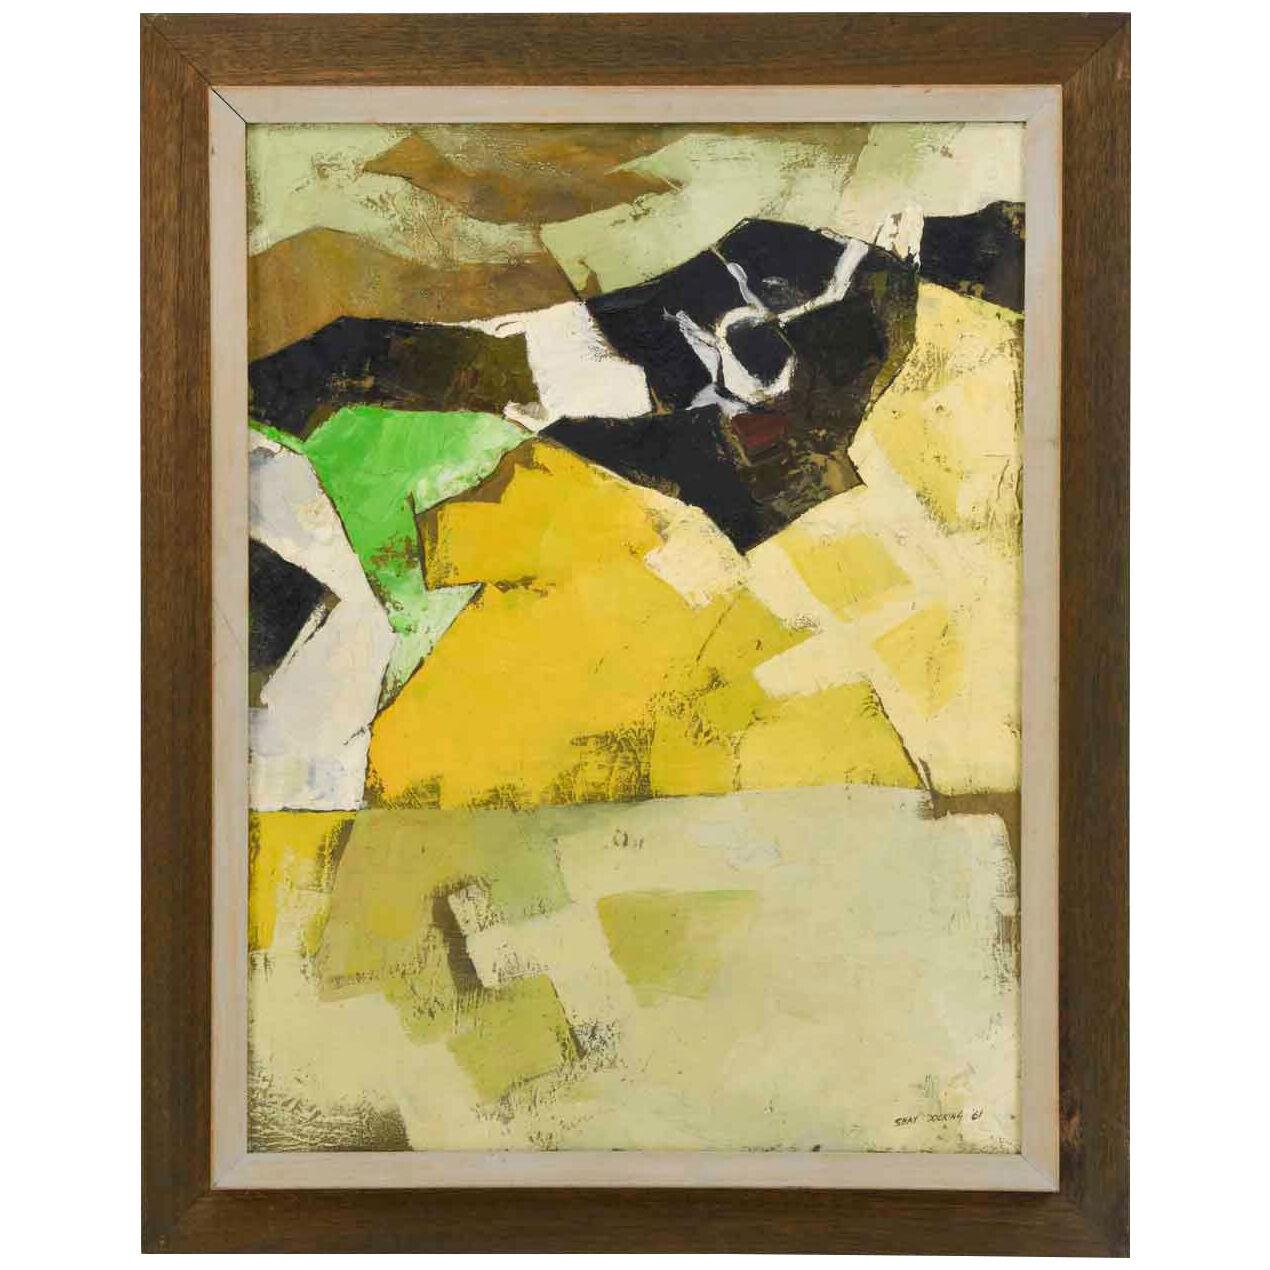 Framed oil on board by Shay Docking (1928-2000), 'The Burnt Paddock'. 